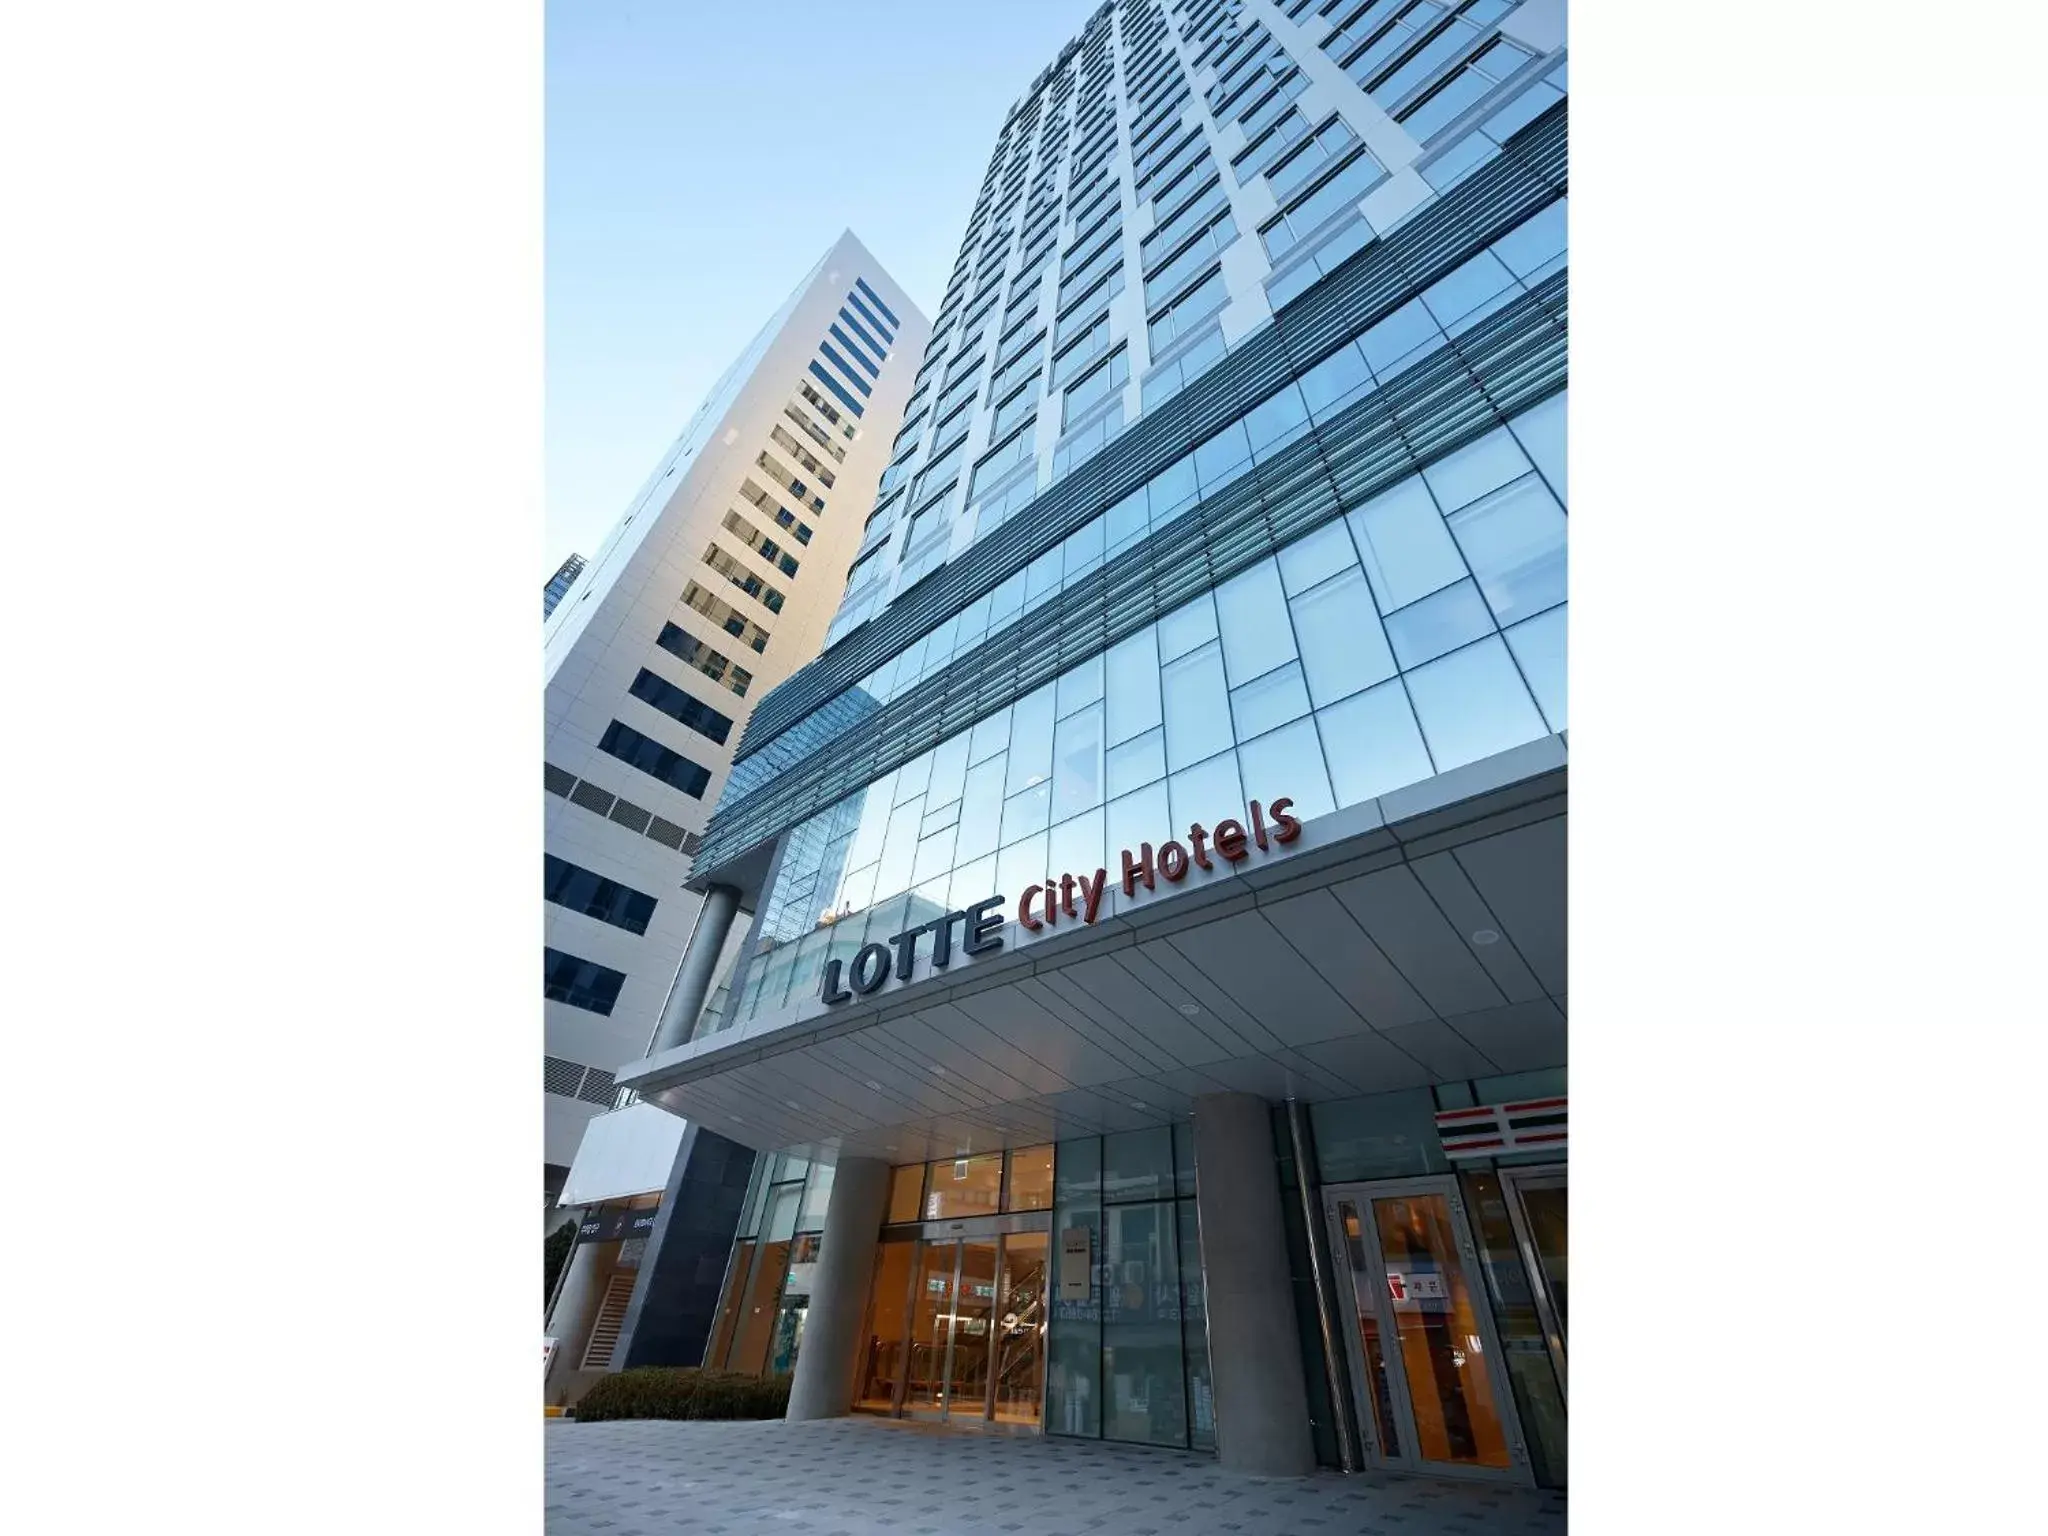 Off site, Property Building in LOTTE City Hotel Myeongdong